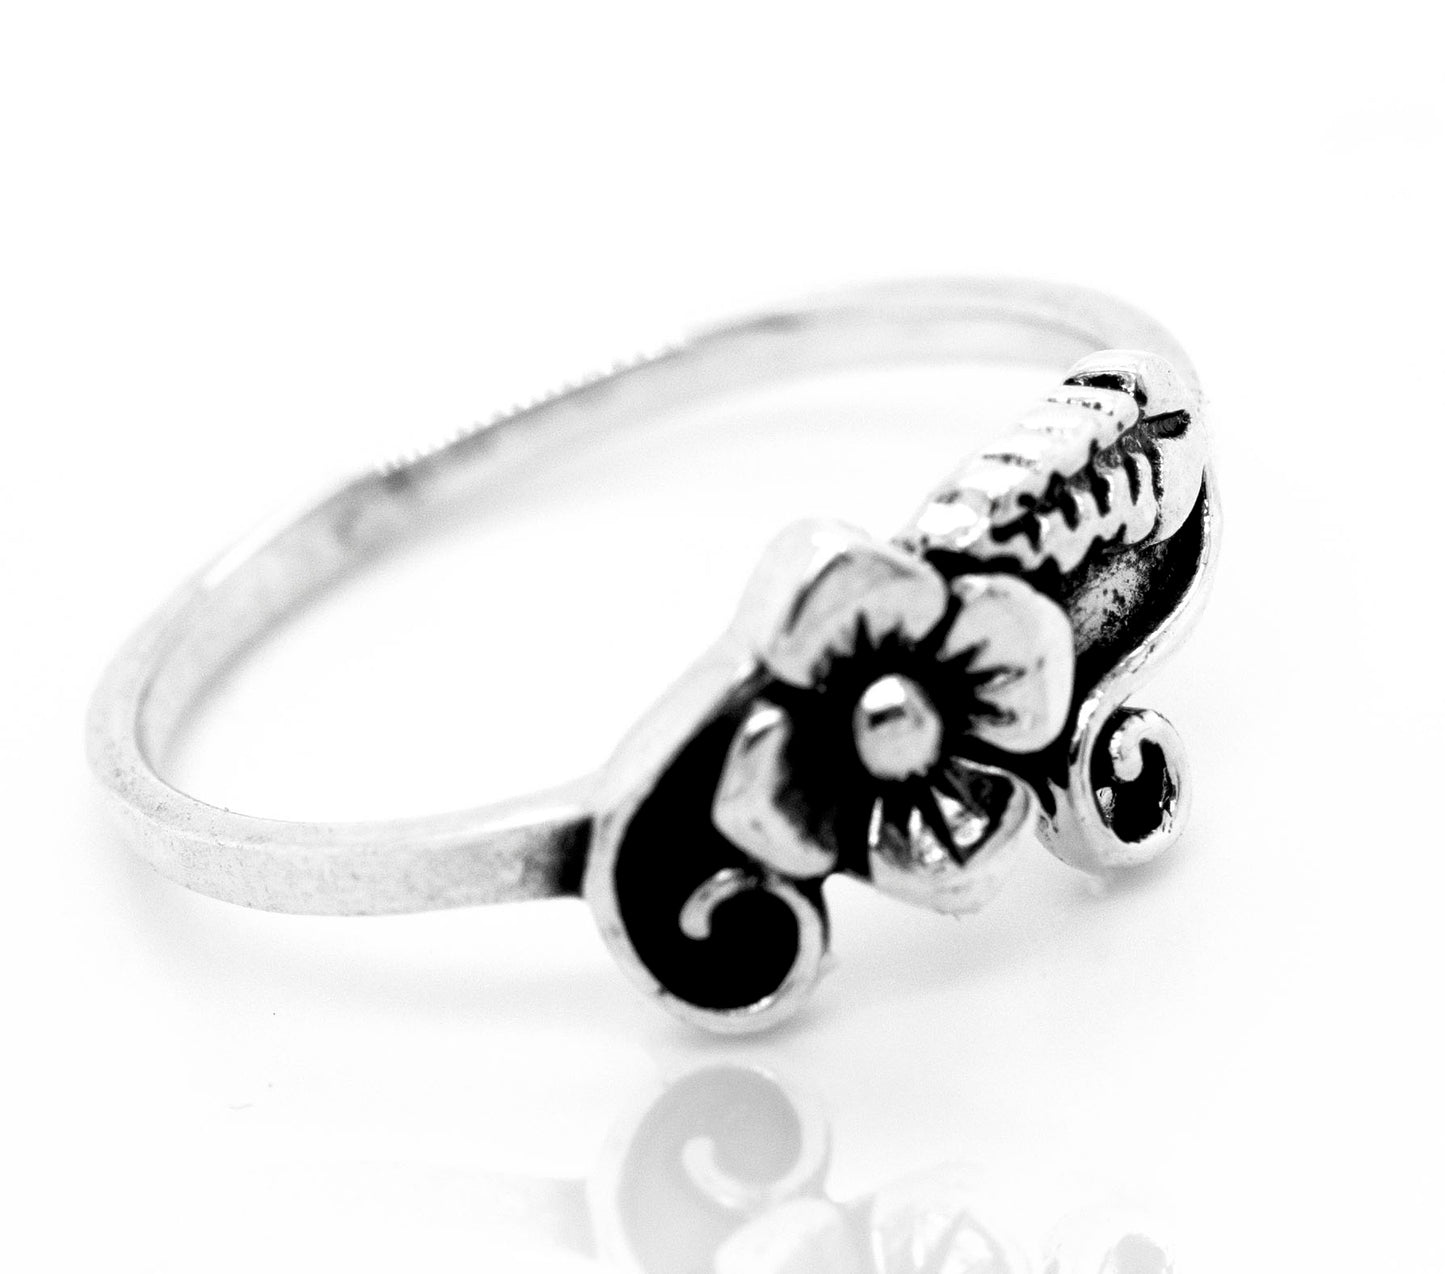 A Flower with Leaf and Swirl Design Ring that embodies the essence of nature.